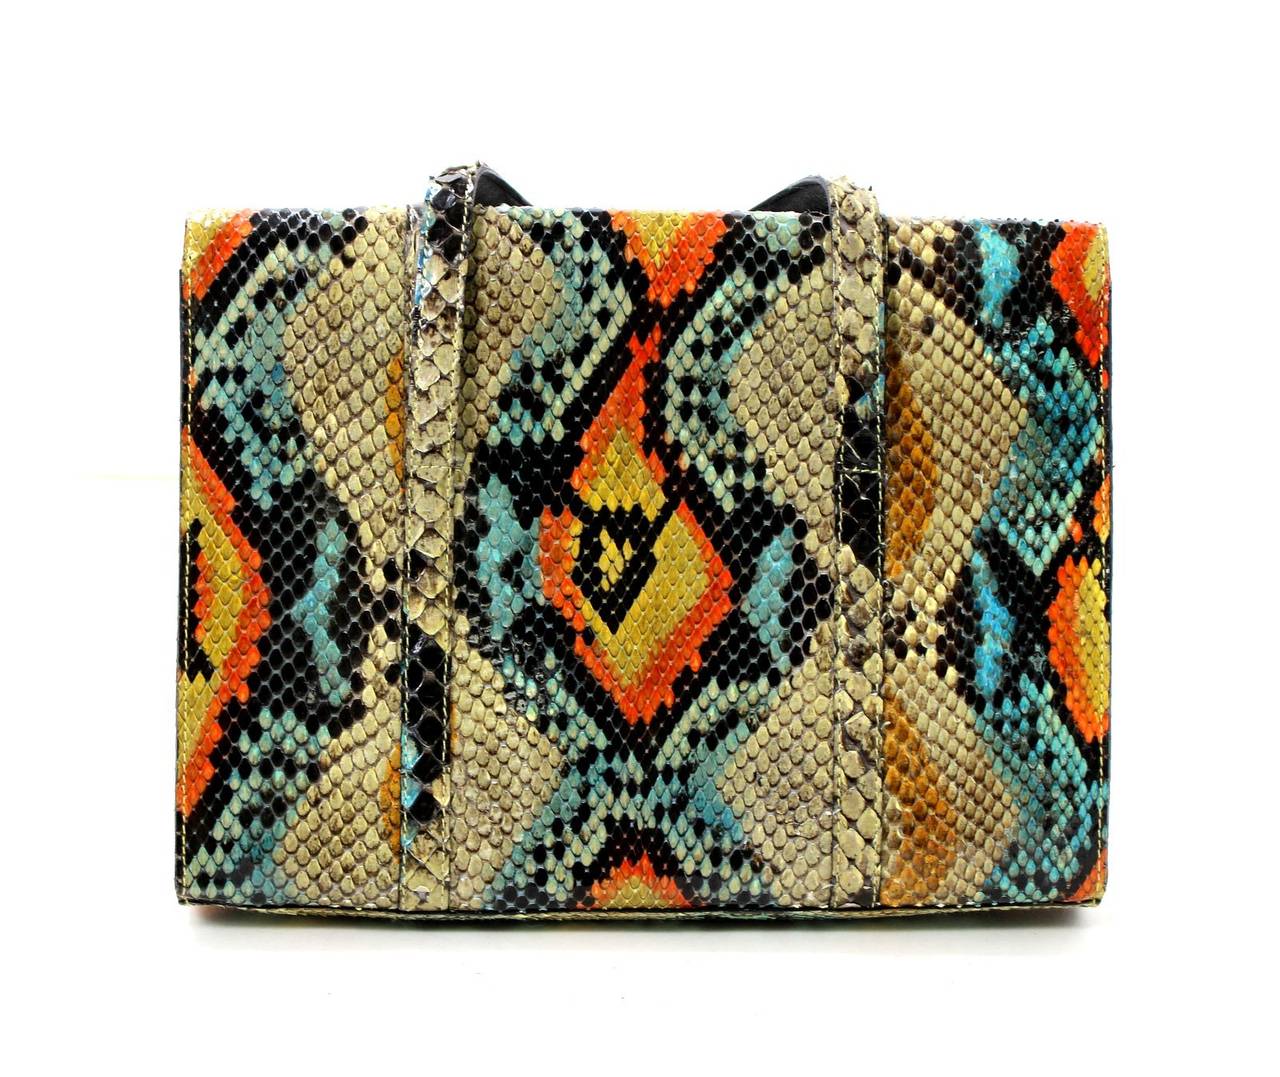 Chanel’s Multicolored Python Flap Satchel is a fantastic fond for a savvy shopper.  It is in excellent plus condition with some light scratches beneath the flap from normal use.   A slim and sophisticated style that delivers a vibrant pop to any